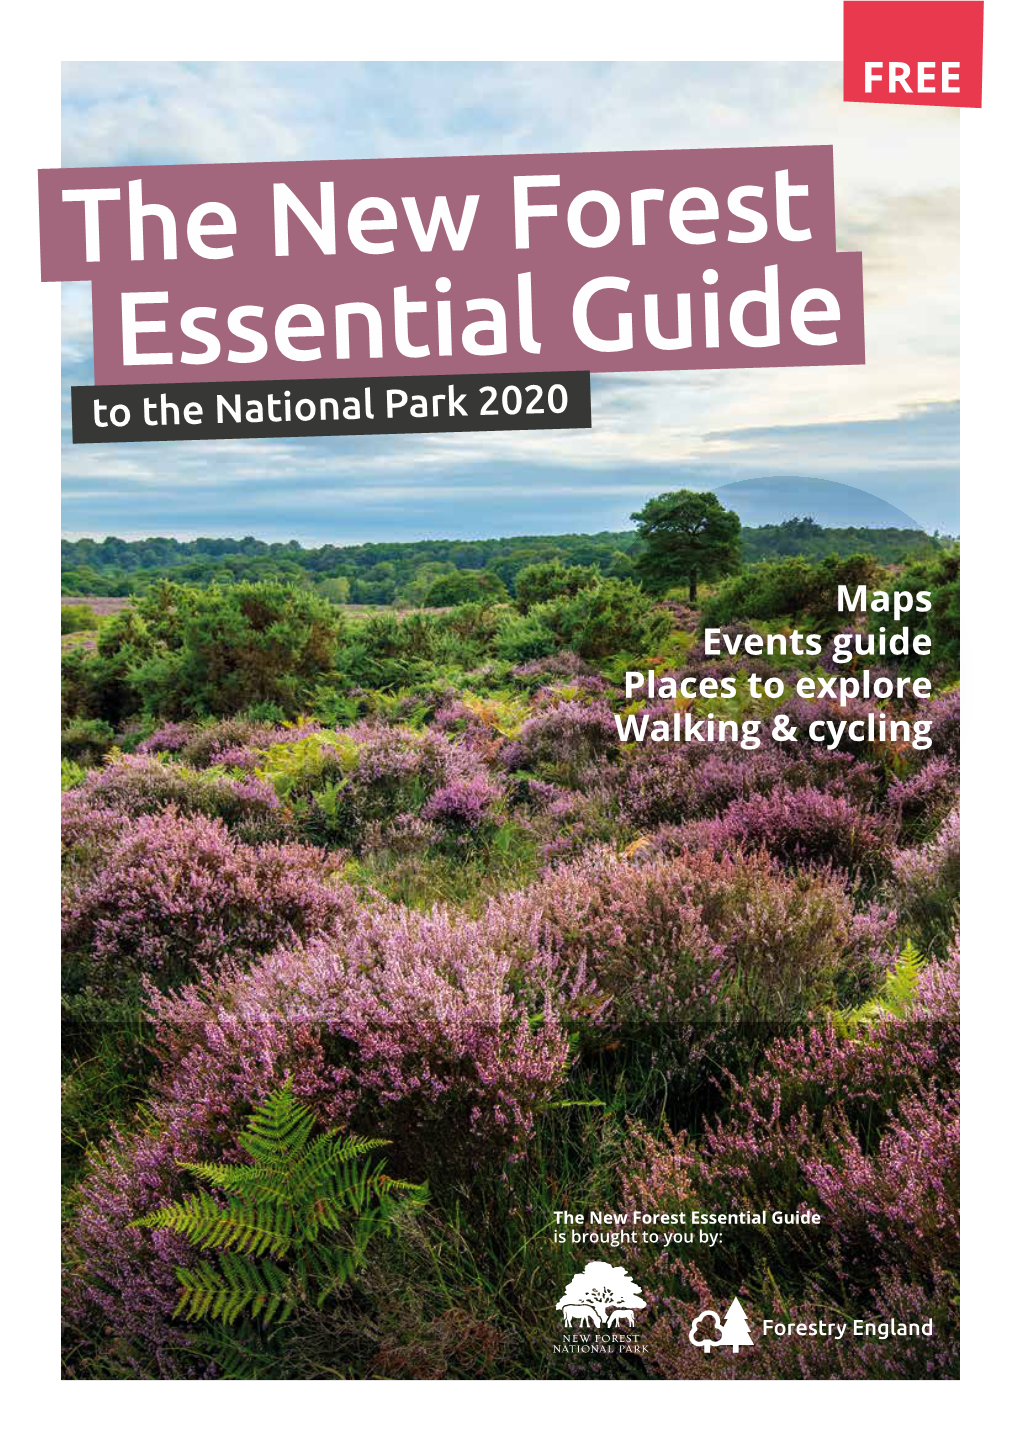 The New Forest Essential Guide to the National Park 2020